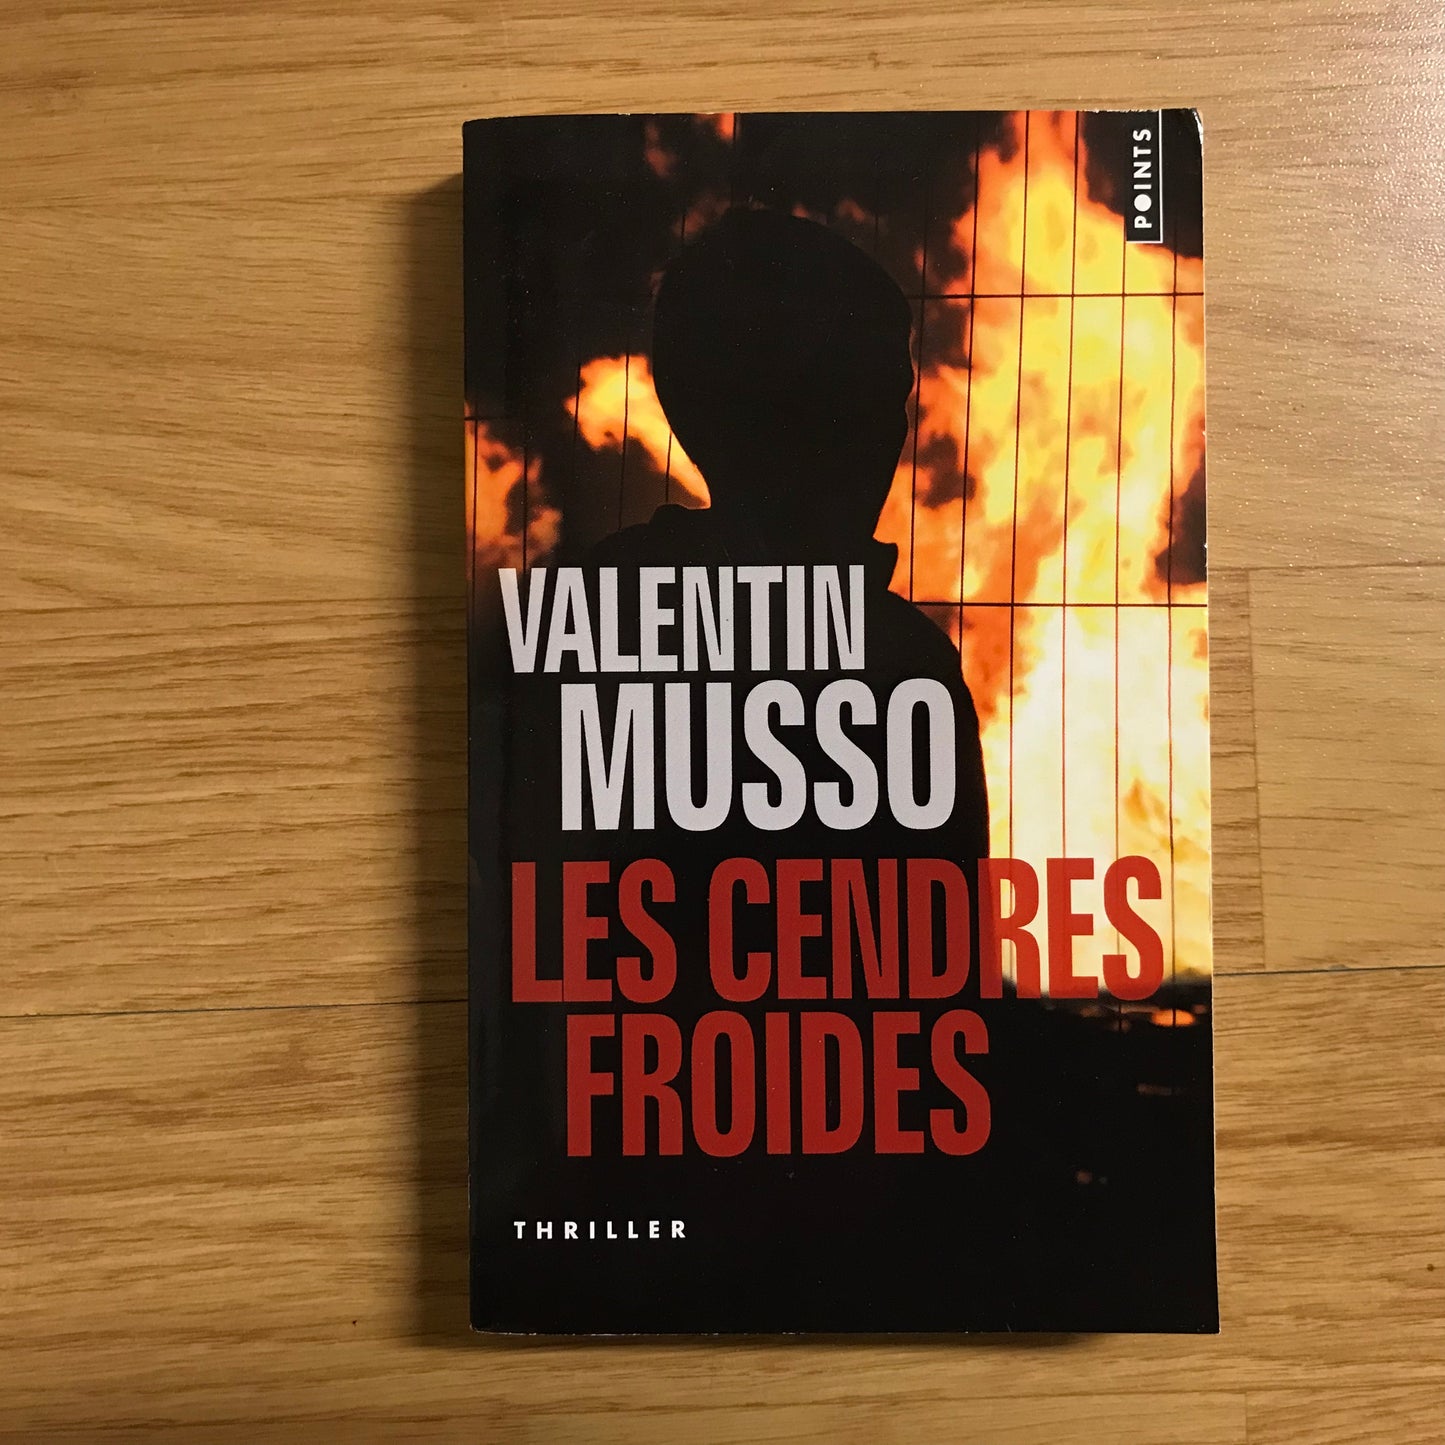 Musso, Valentin - Les cendres froides